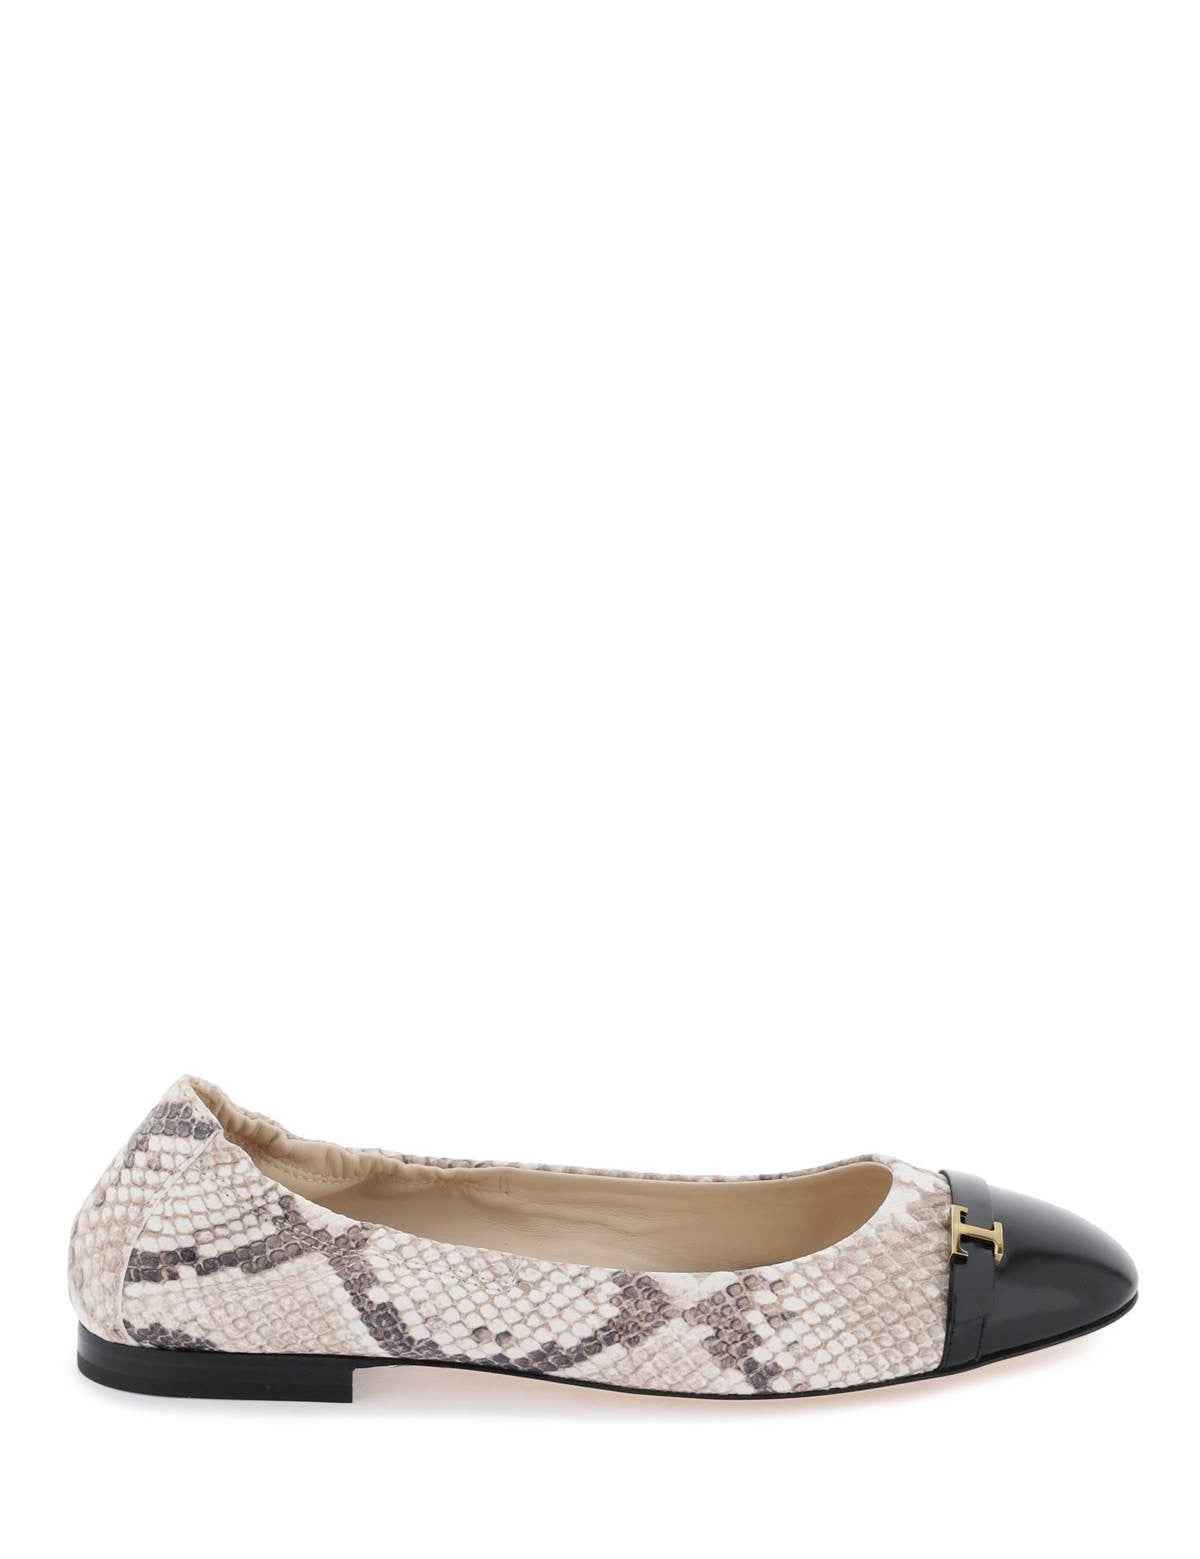 tod-s-snake-printed-leather-ballet-flats.jpg